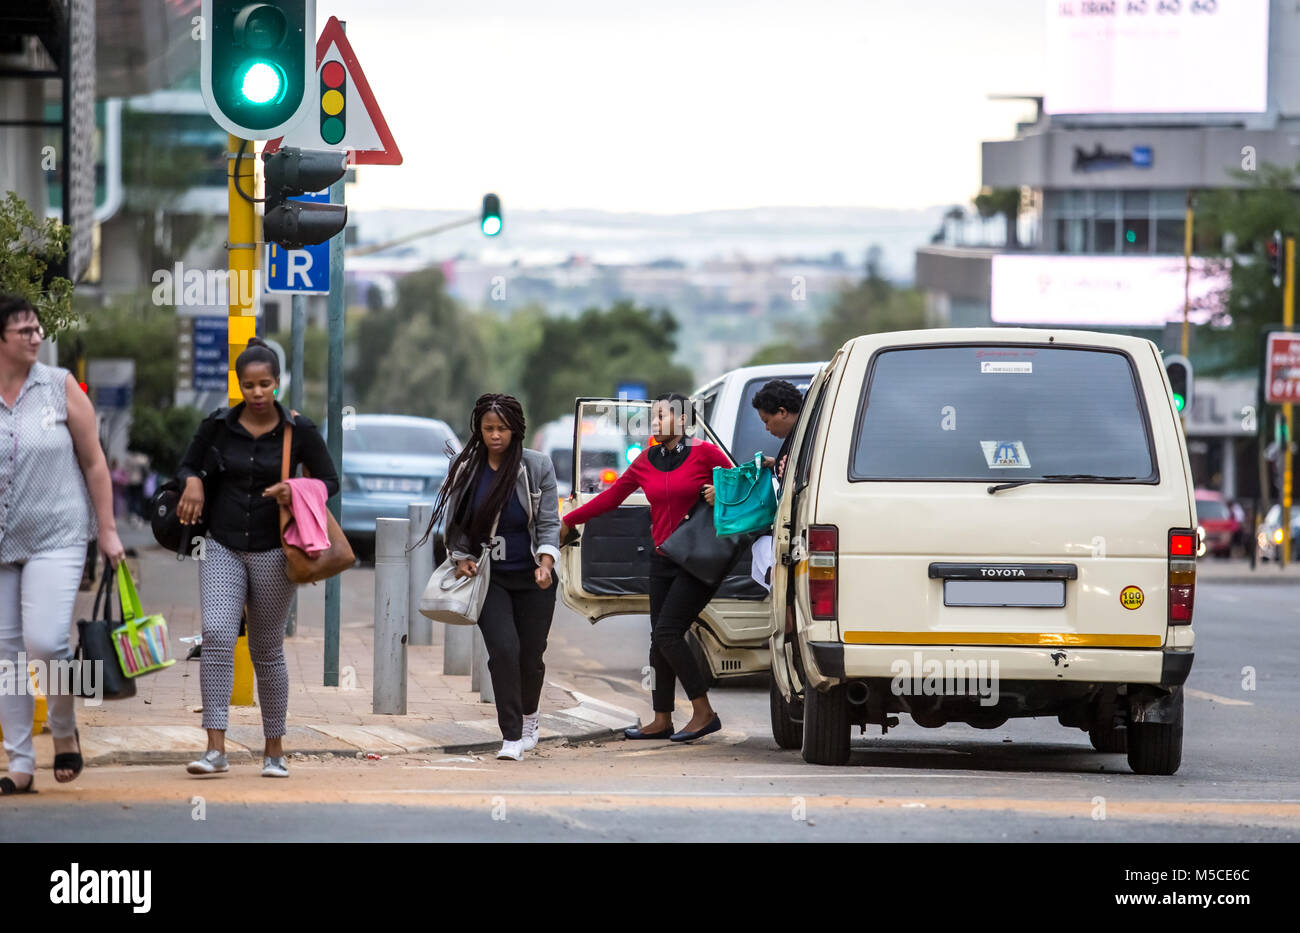 People getting out of taxi in city traffic. Johannesburg, South Africa -February 15, 2018 Stock Photo